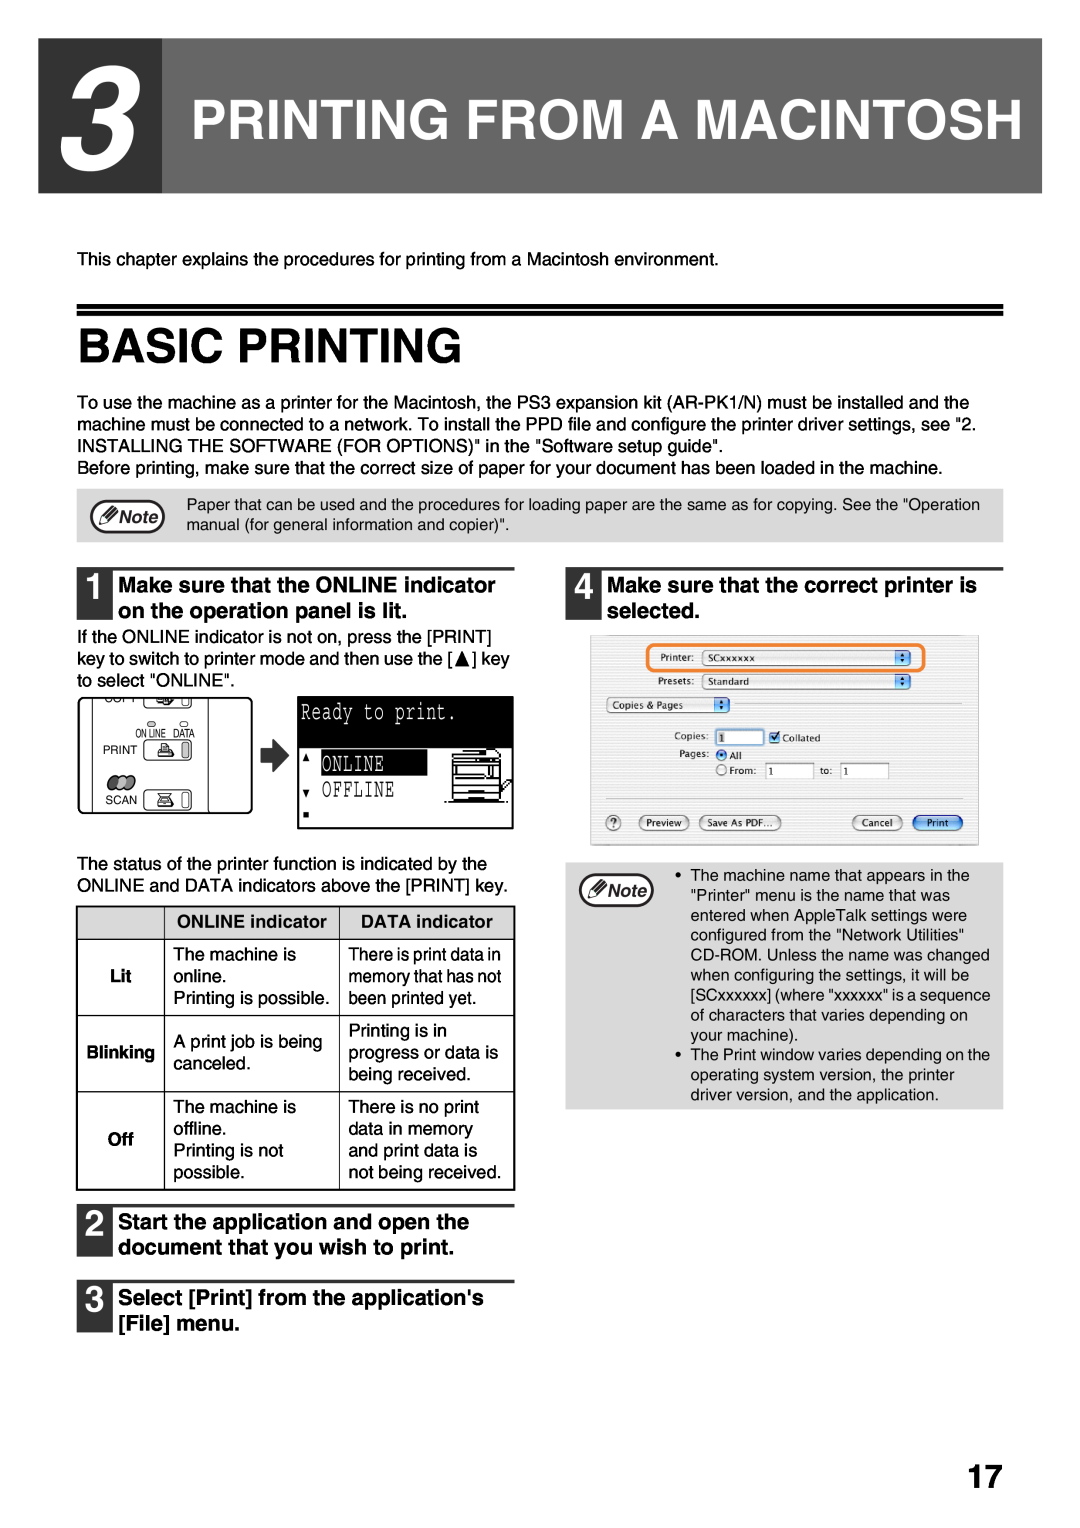 Sharp AR-NB3 Printing From A Macintosh, Make sure that the correct printer is selected, Basic Printing, Ready to print 